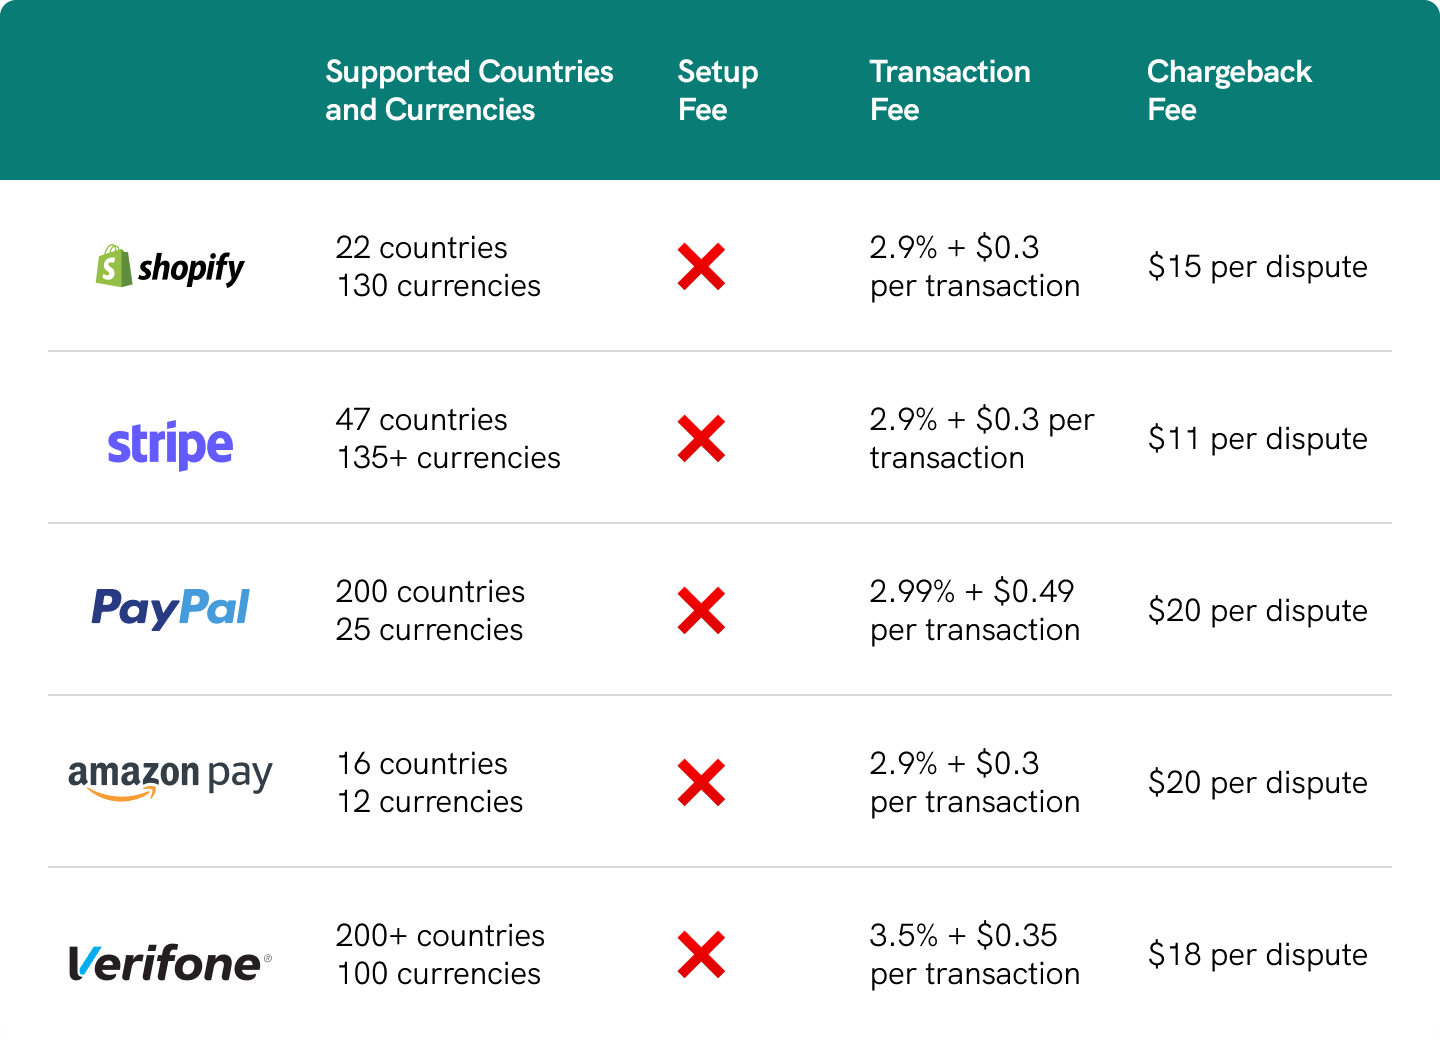 infographic table of the 5 best payment gateways for Shopify and their supported countries, currencies, setup fees, transaction fee, and chargeback fee for each method.